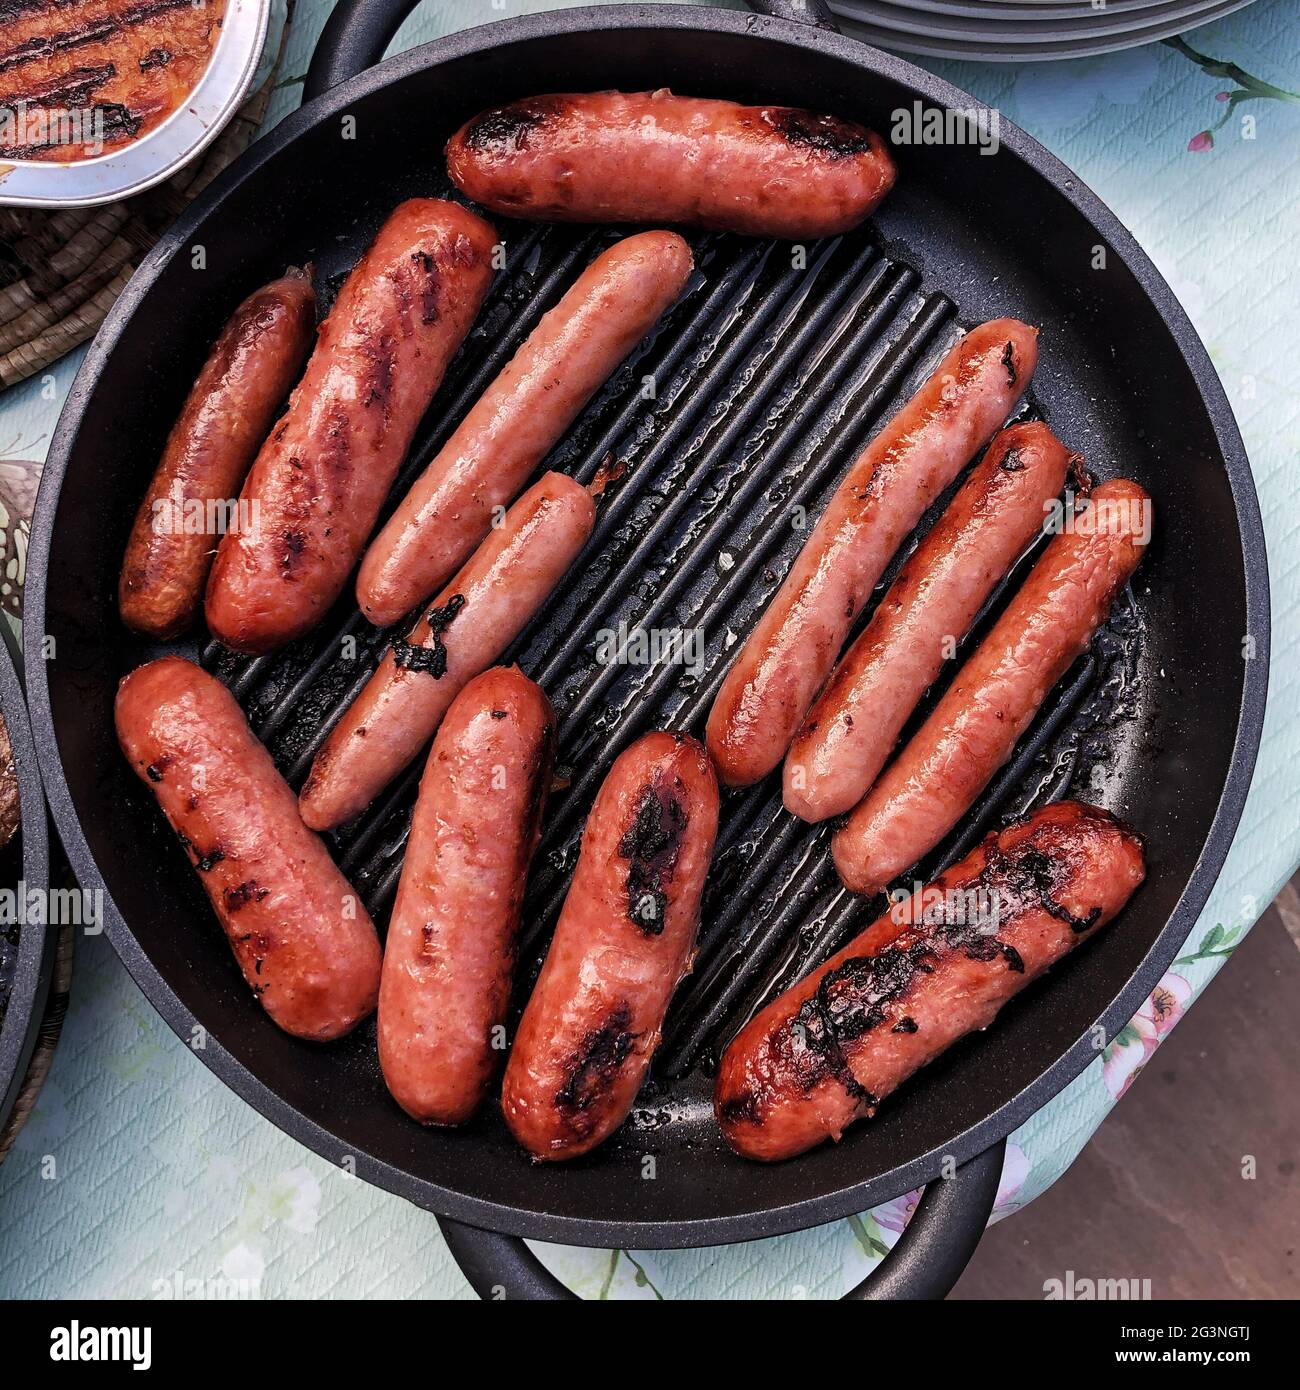 Looking down from above onto a frying pan full of cooked sausages Stock Photo